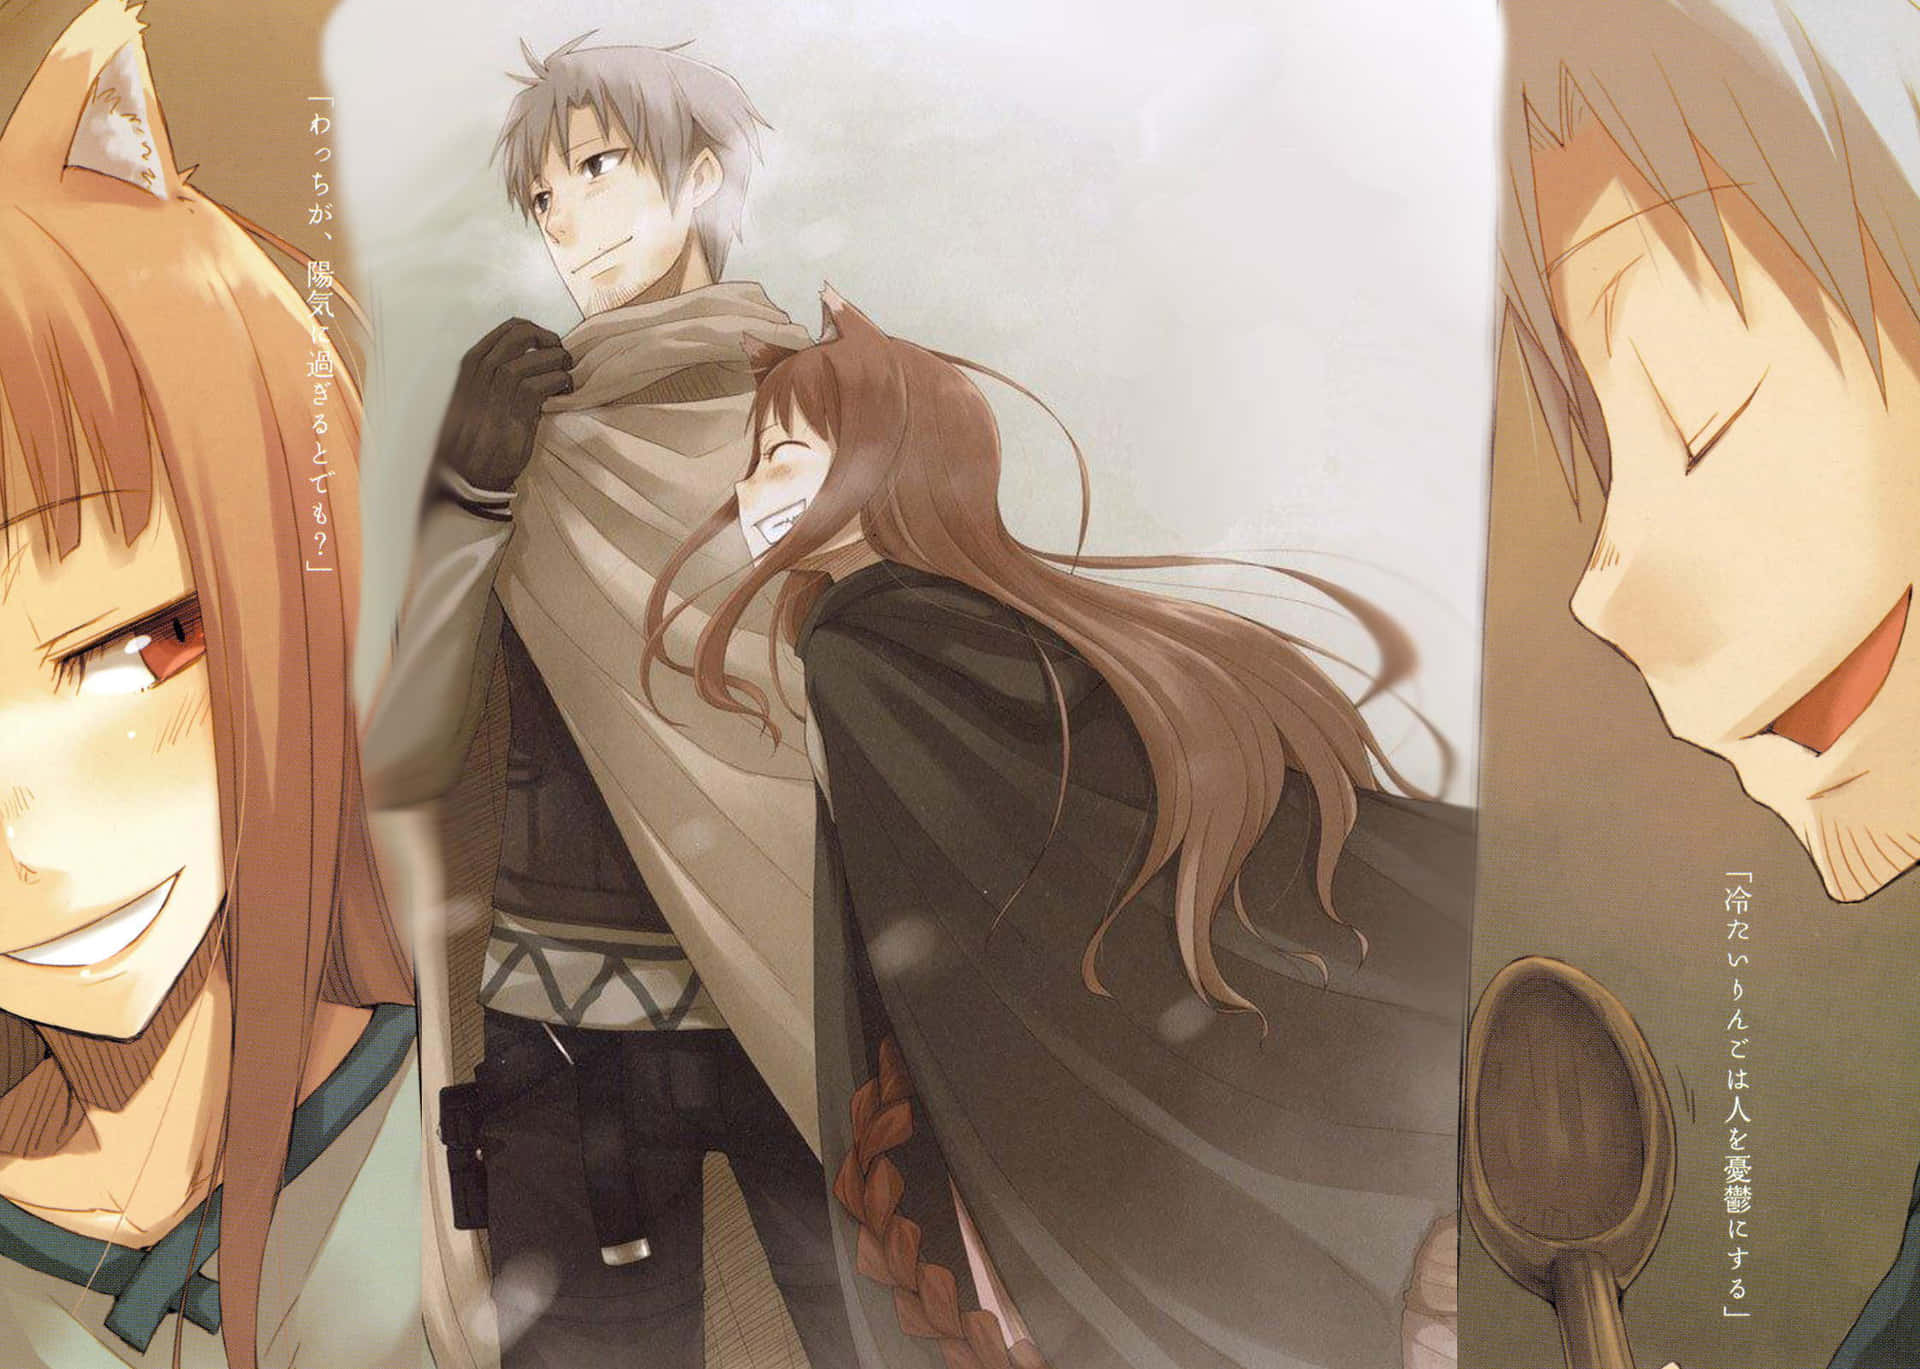 Spice and Wolf’s Holo Snuggles Up to Her Human Friend Wallpaper